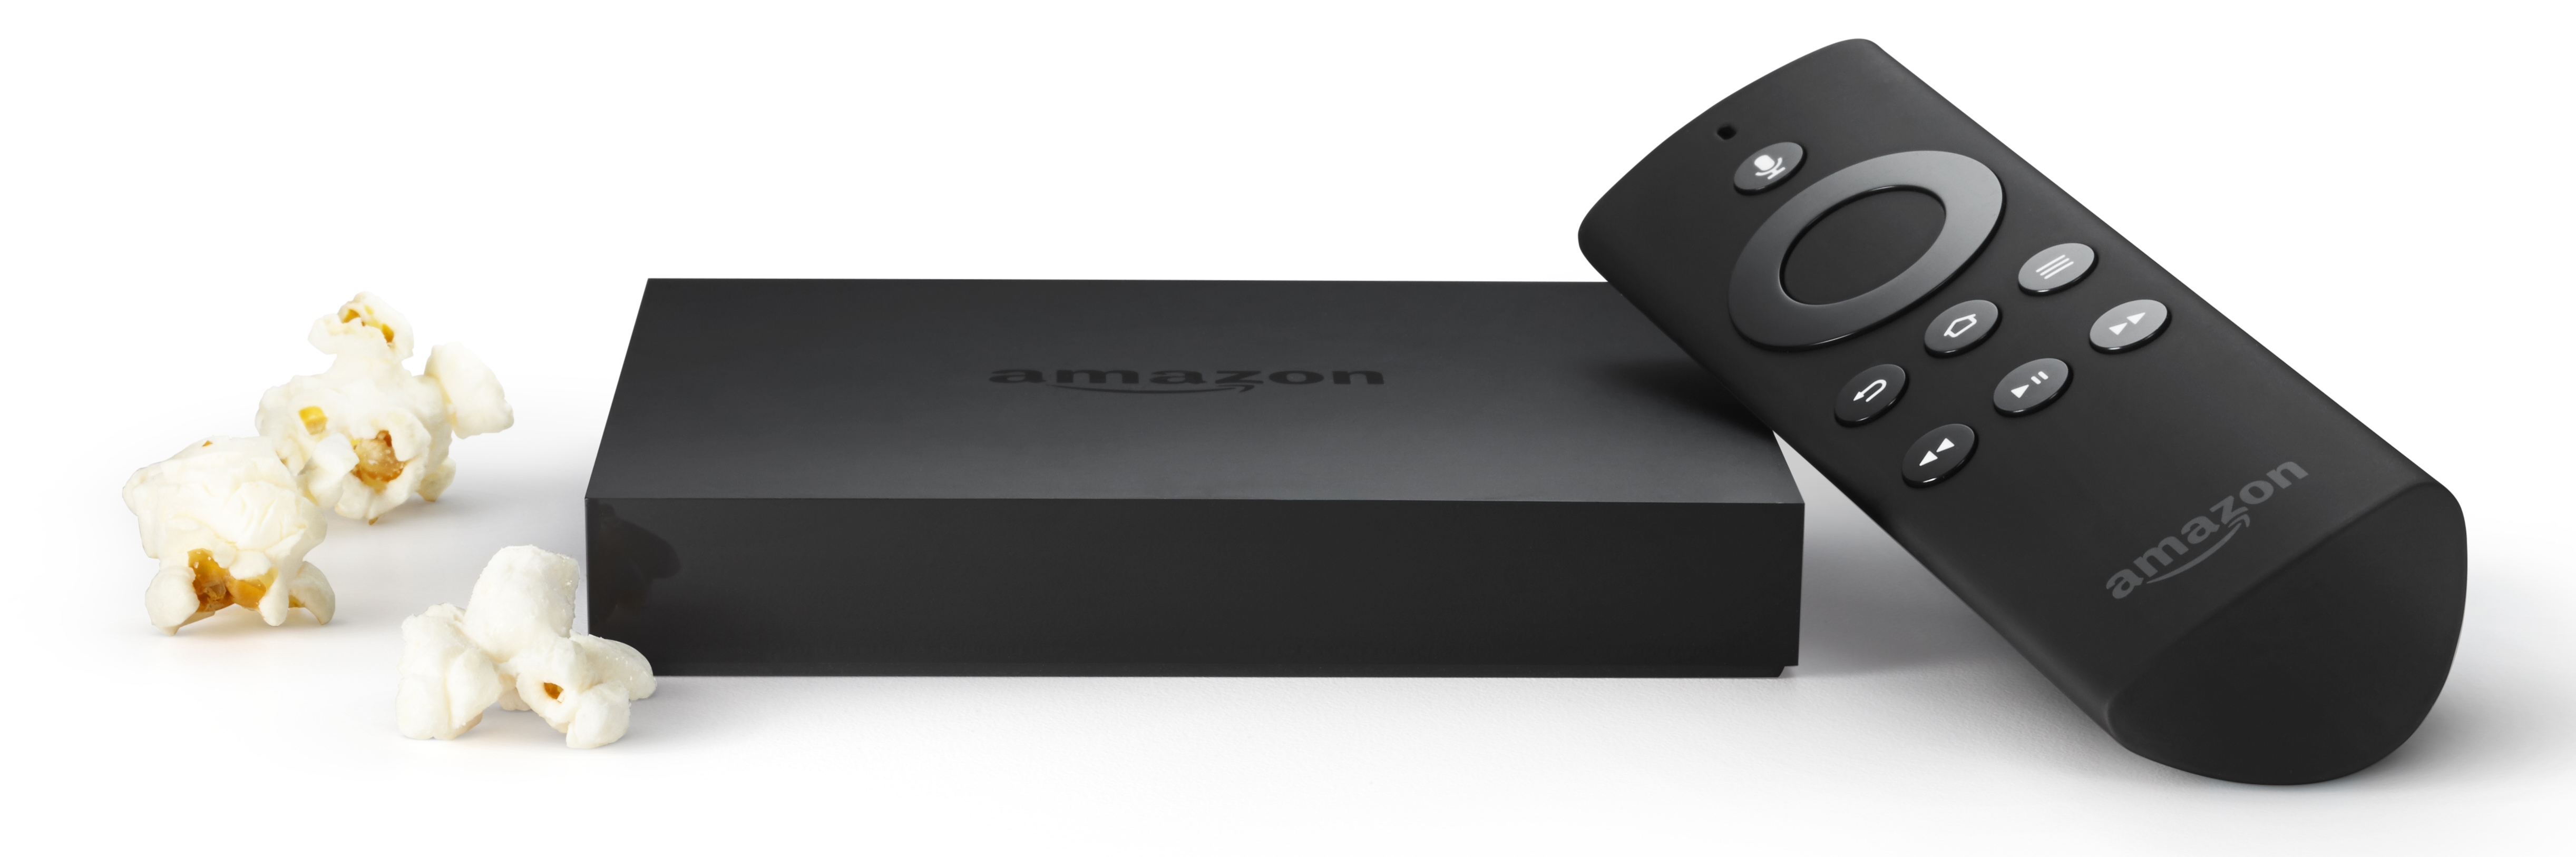 Amazon Fire TV (flat, with remote, popcorn)